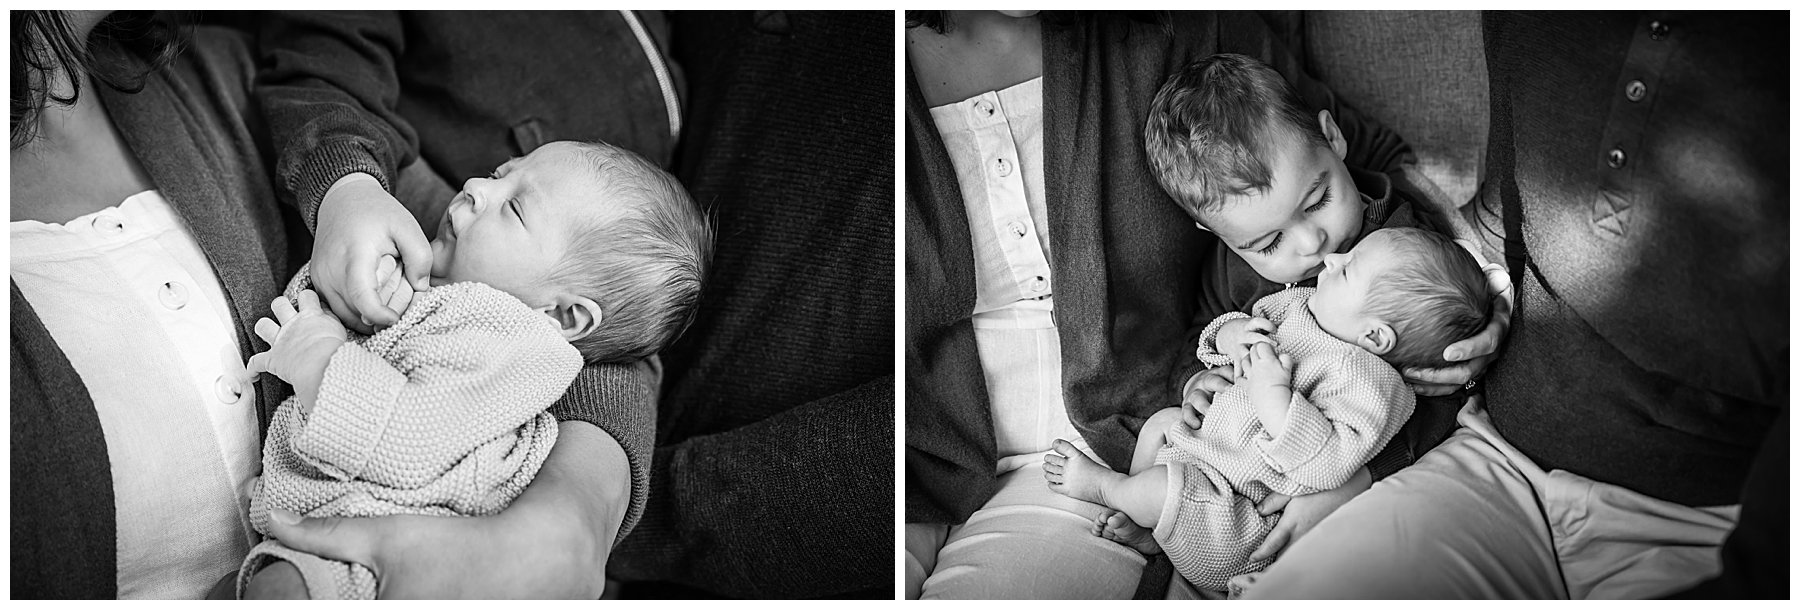 newborn baby boy black and white with brother